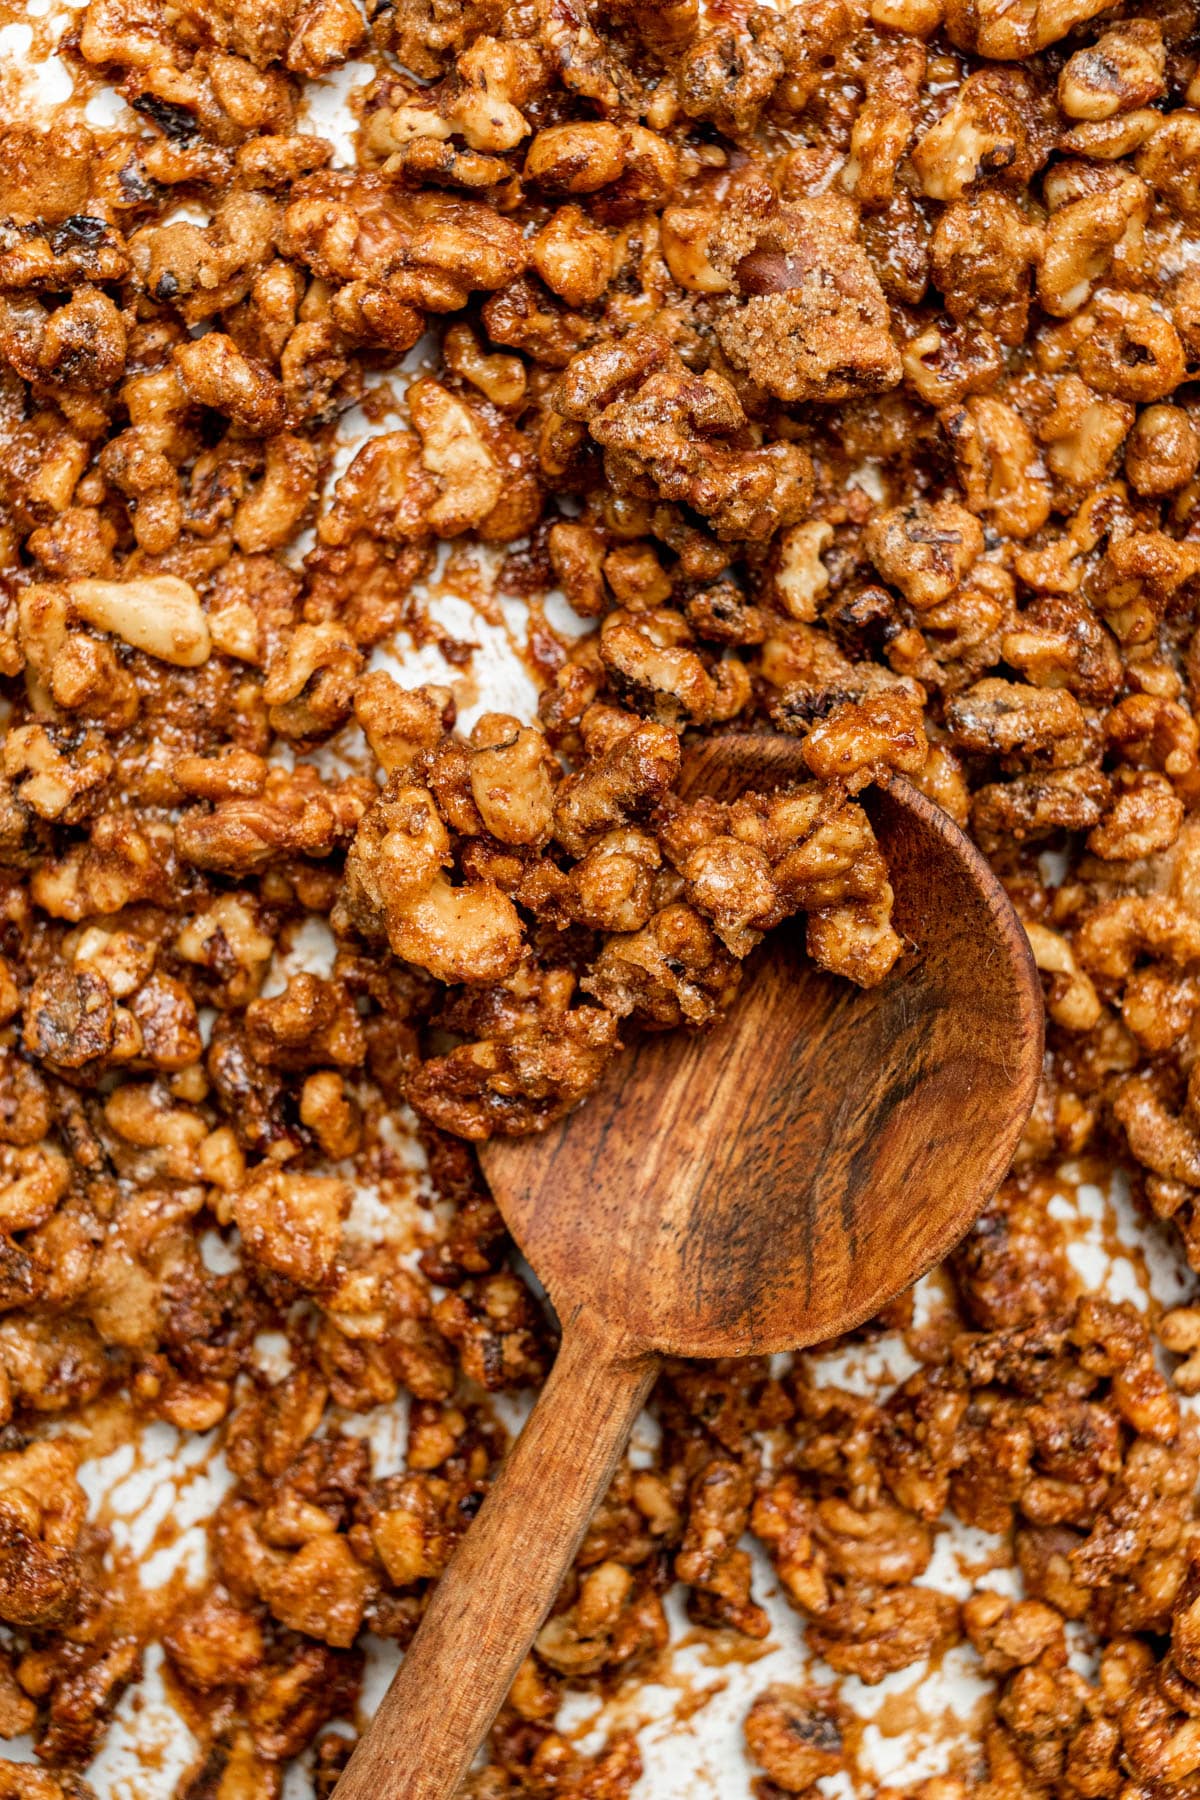 Candied walnuts on a baking sheet along with a decorative wooden spoon.